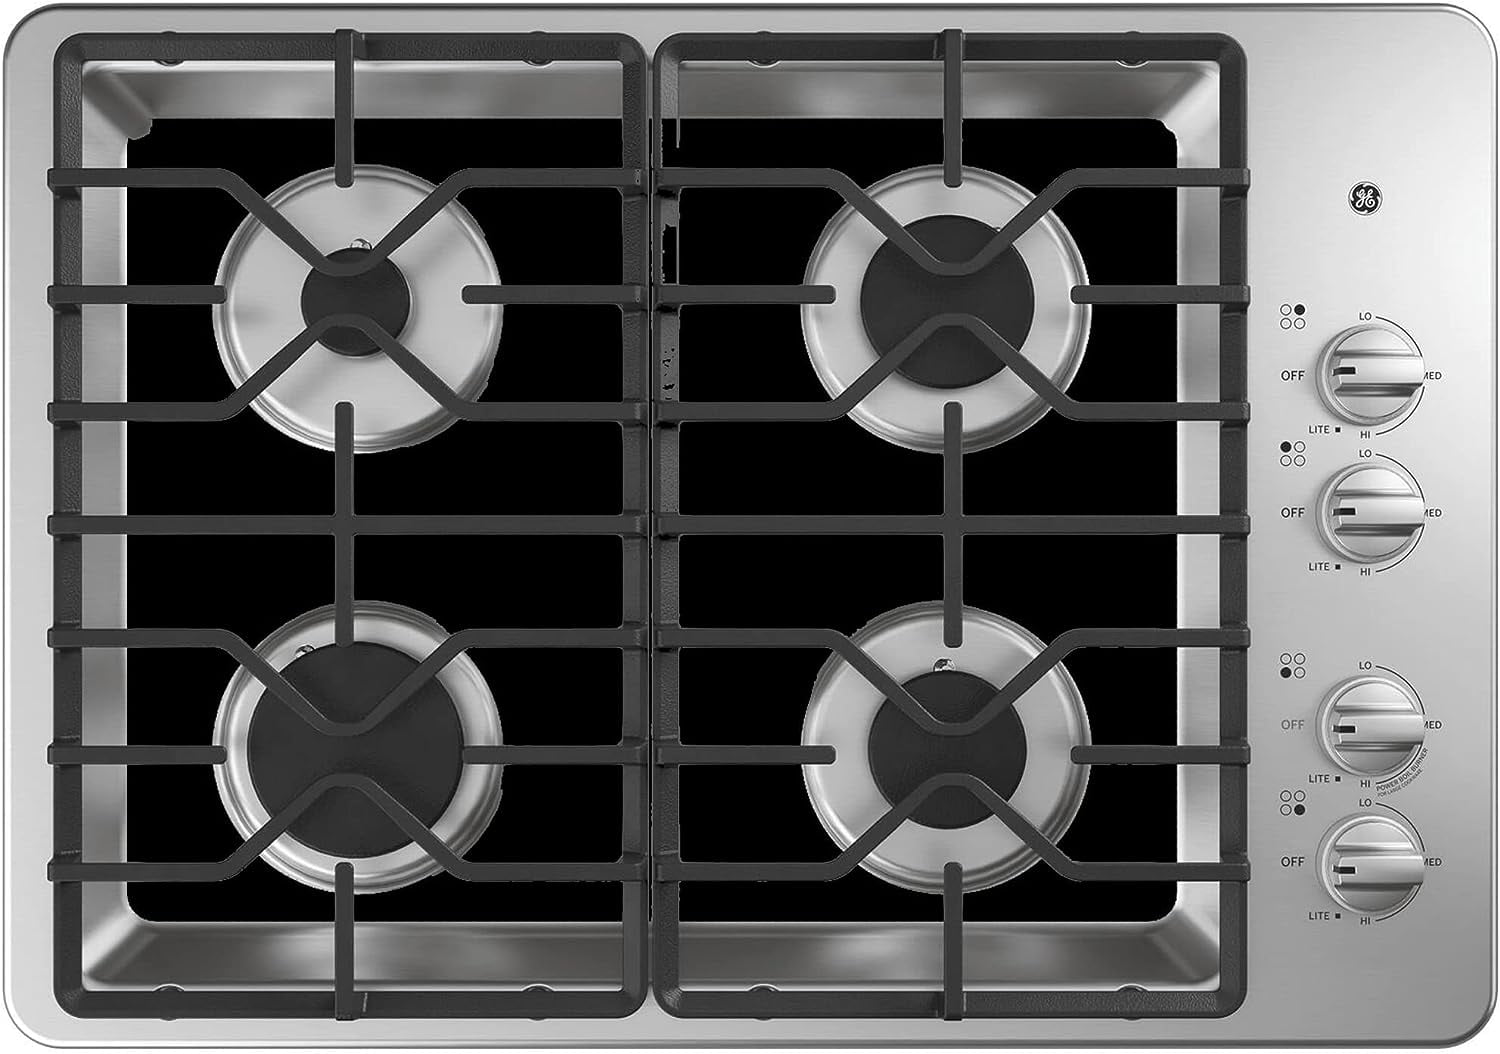 Gas Stove Covers - 16 PCS Gas Range Stove Burner Protectors - Double  Thickness & Heat Resistant Stove Top Covers 10.5-Inch - FREE Eyeglass Pouch  (Silver) 